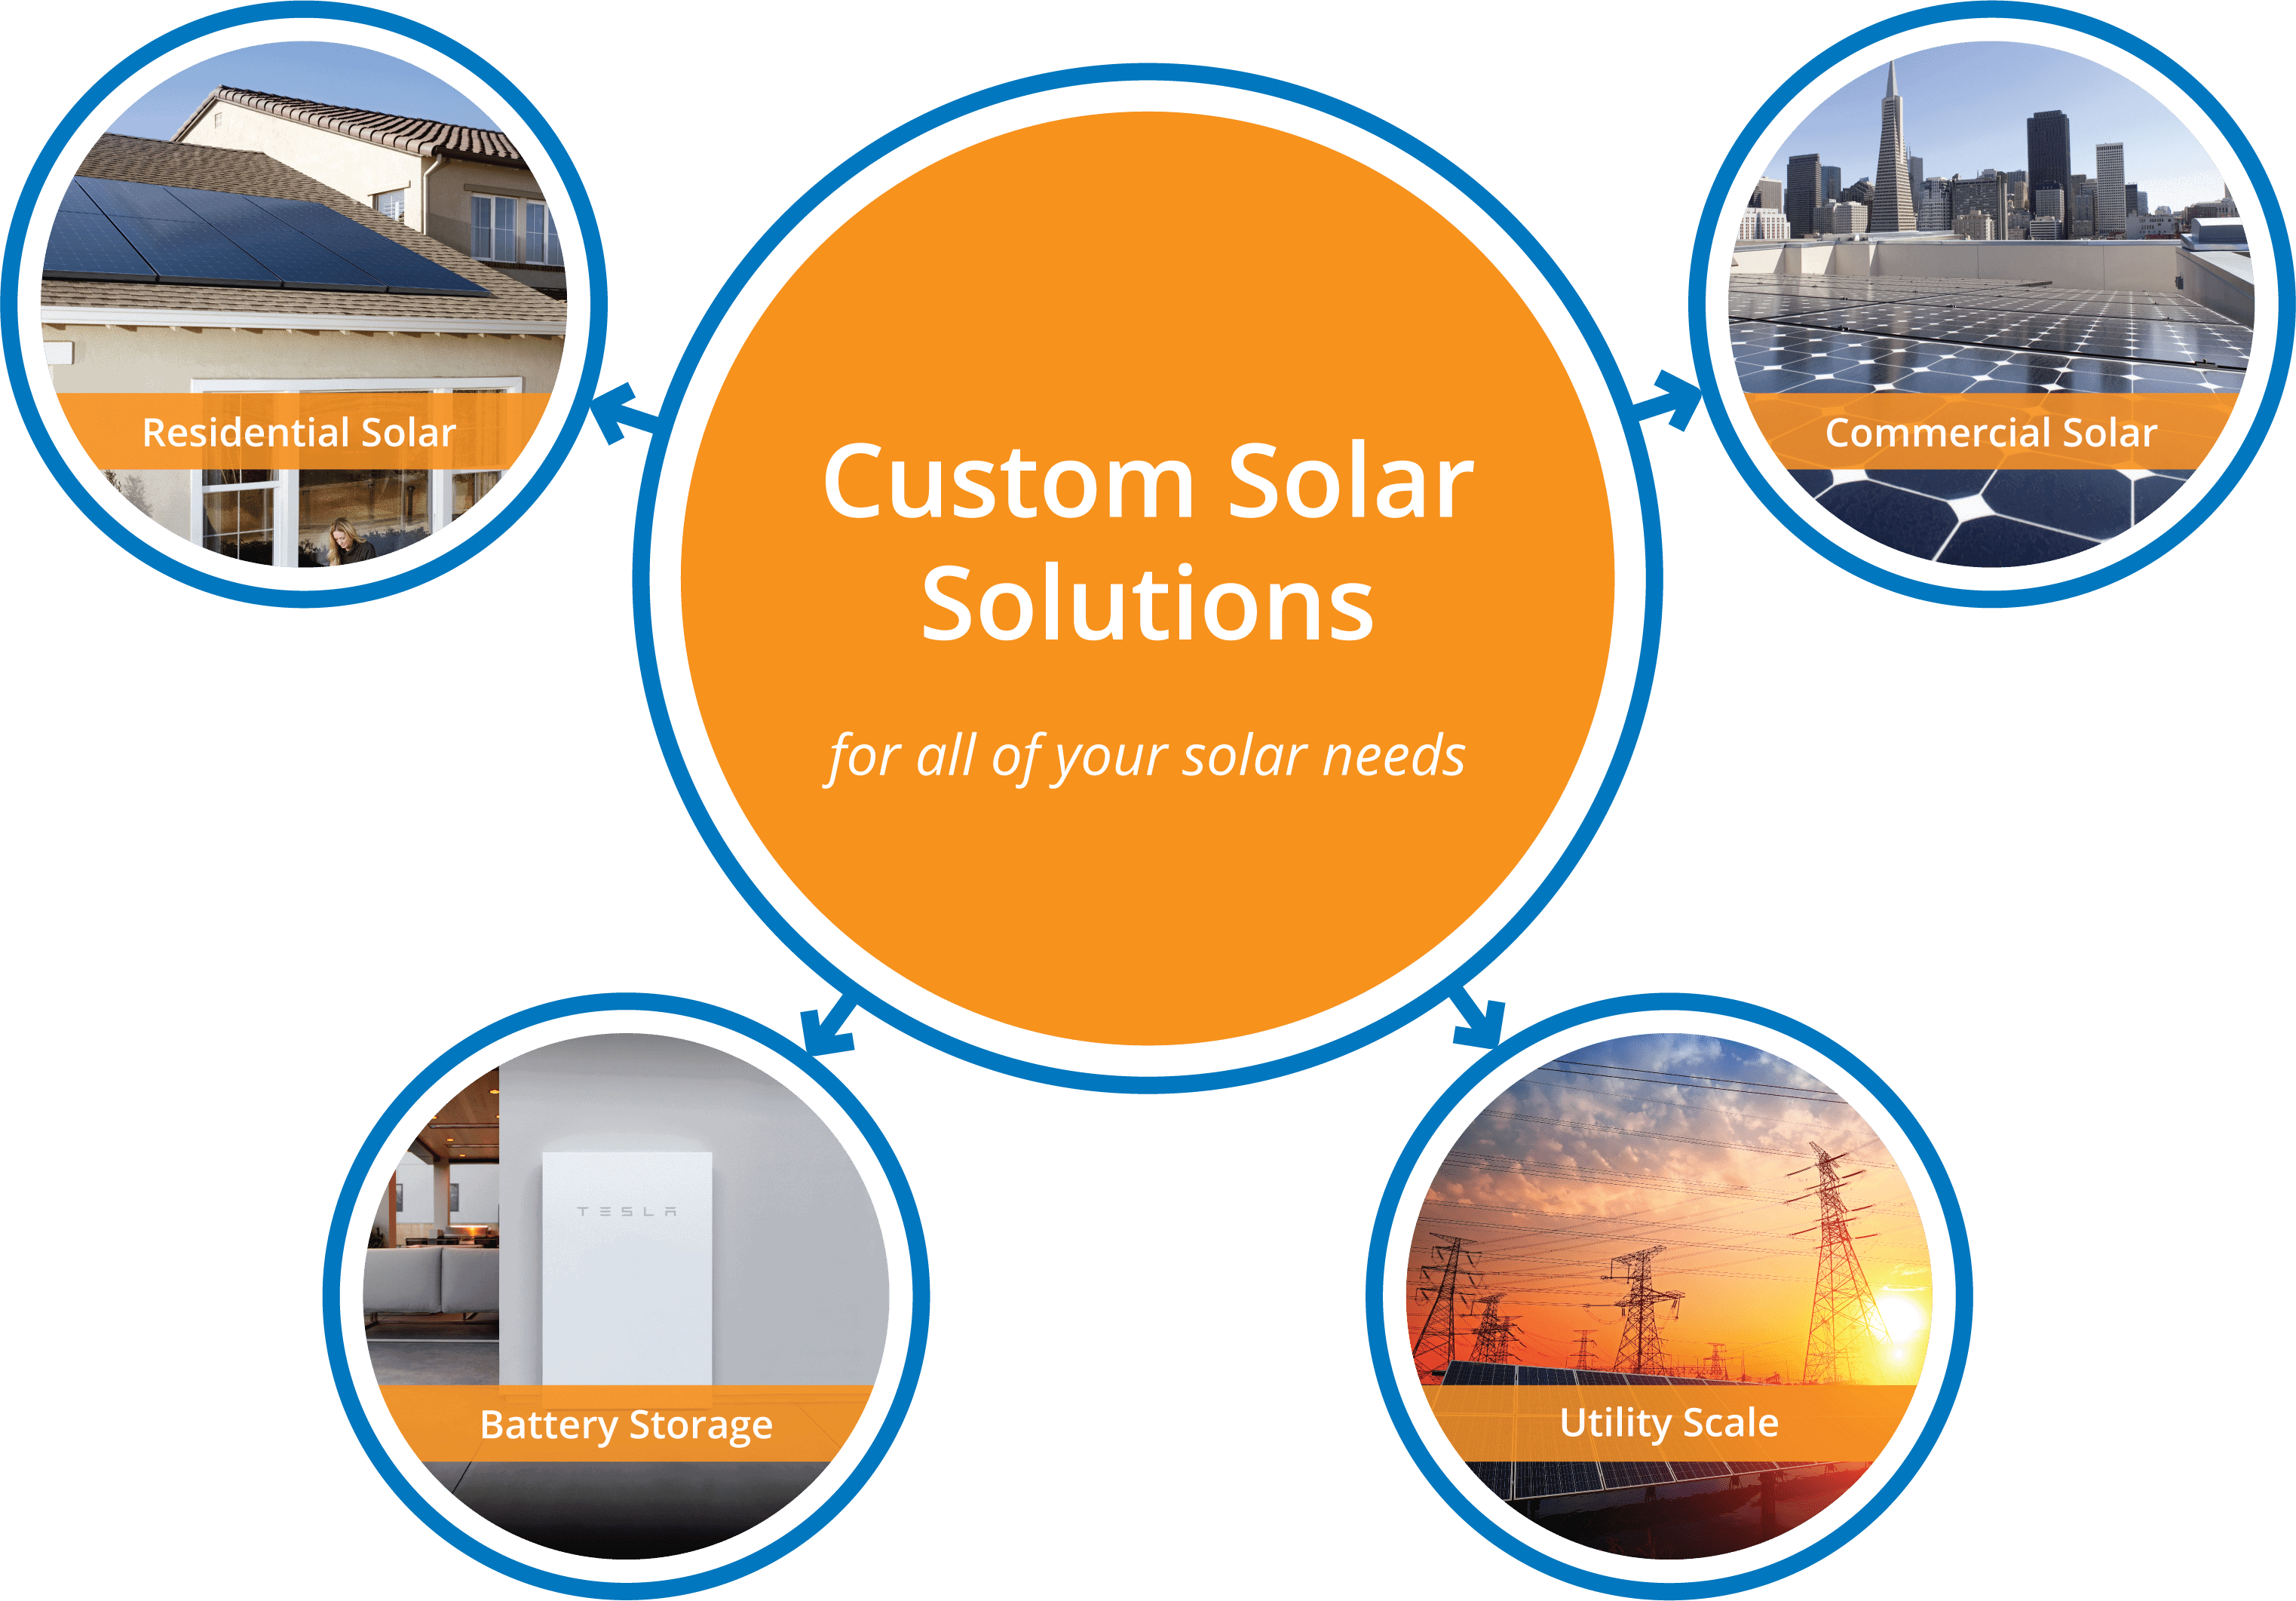 Precis Solar has custom solar solutions for all of your solar needs. Including battery storage, residential solar, commercial solar, and utility scale solar.